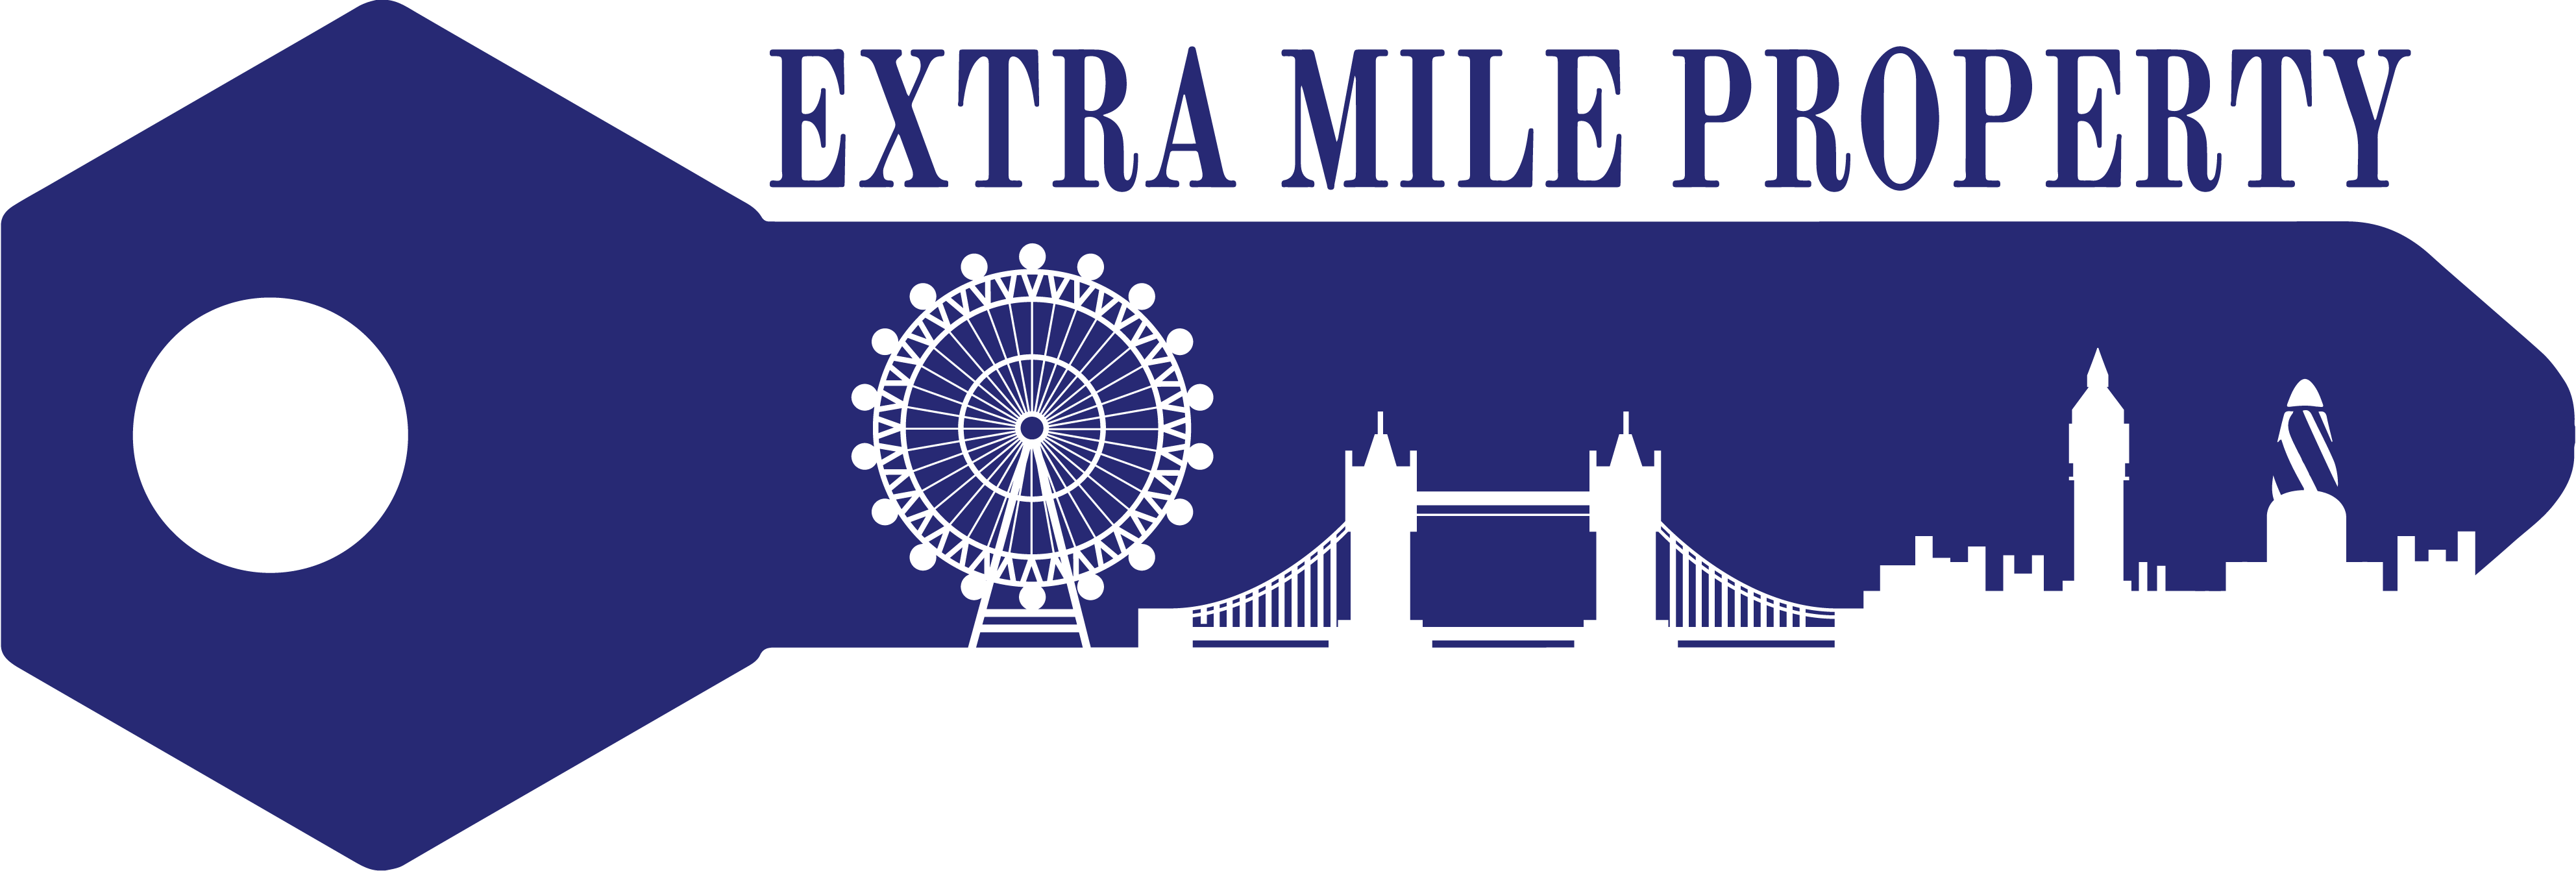 Extra Mile Property - London : Letting agents in Mitcham Greater London Merton